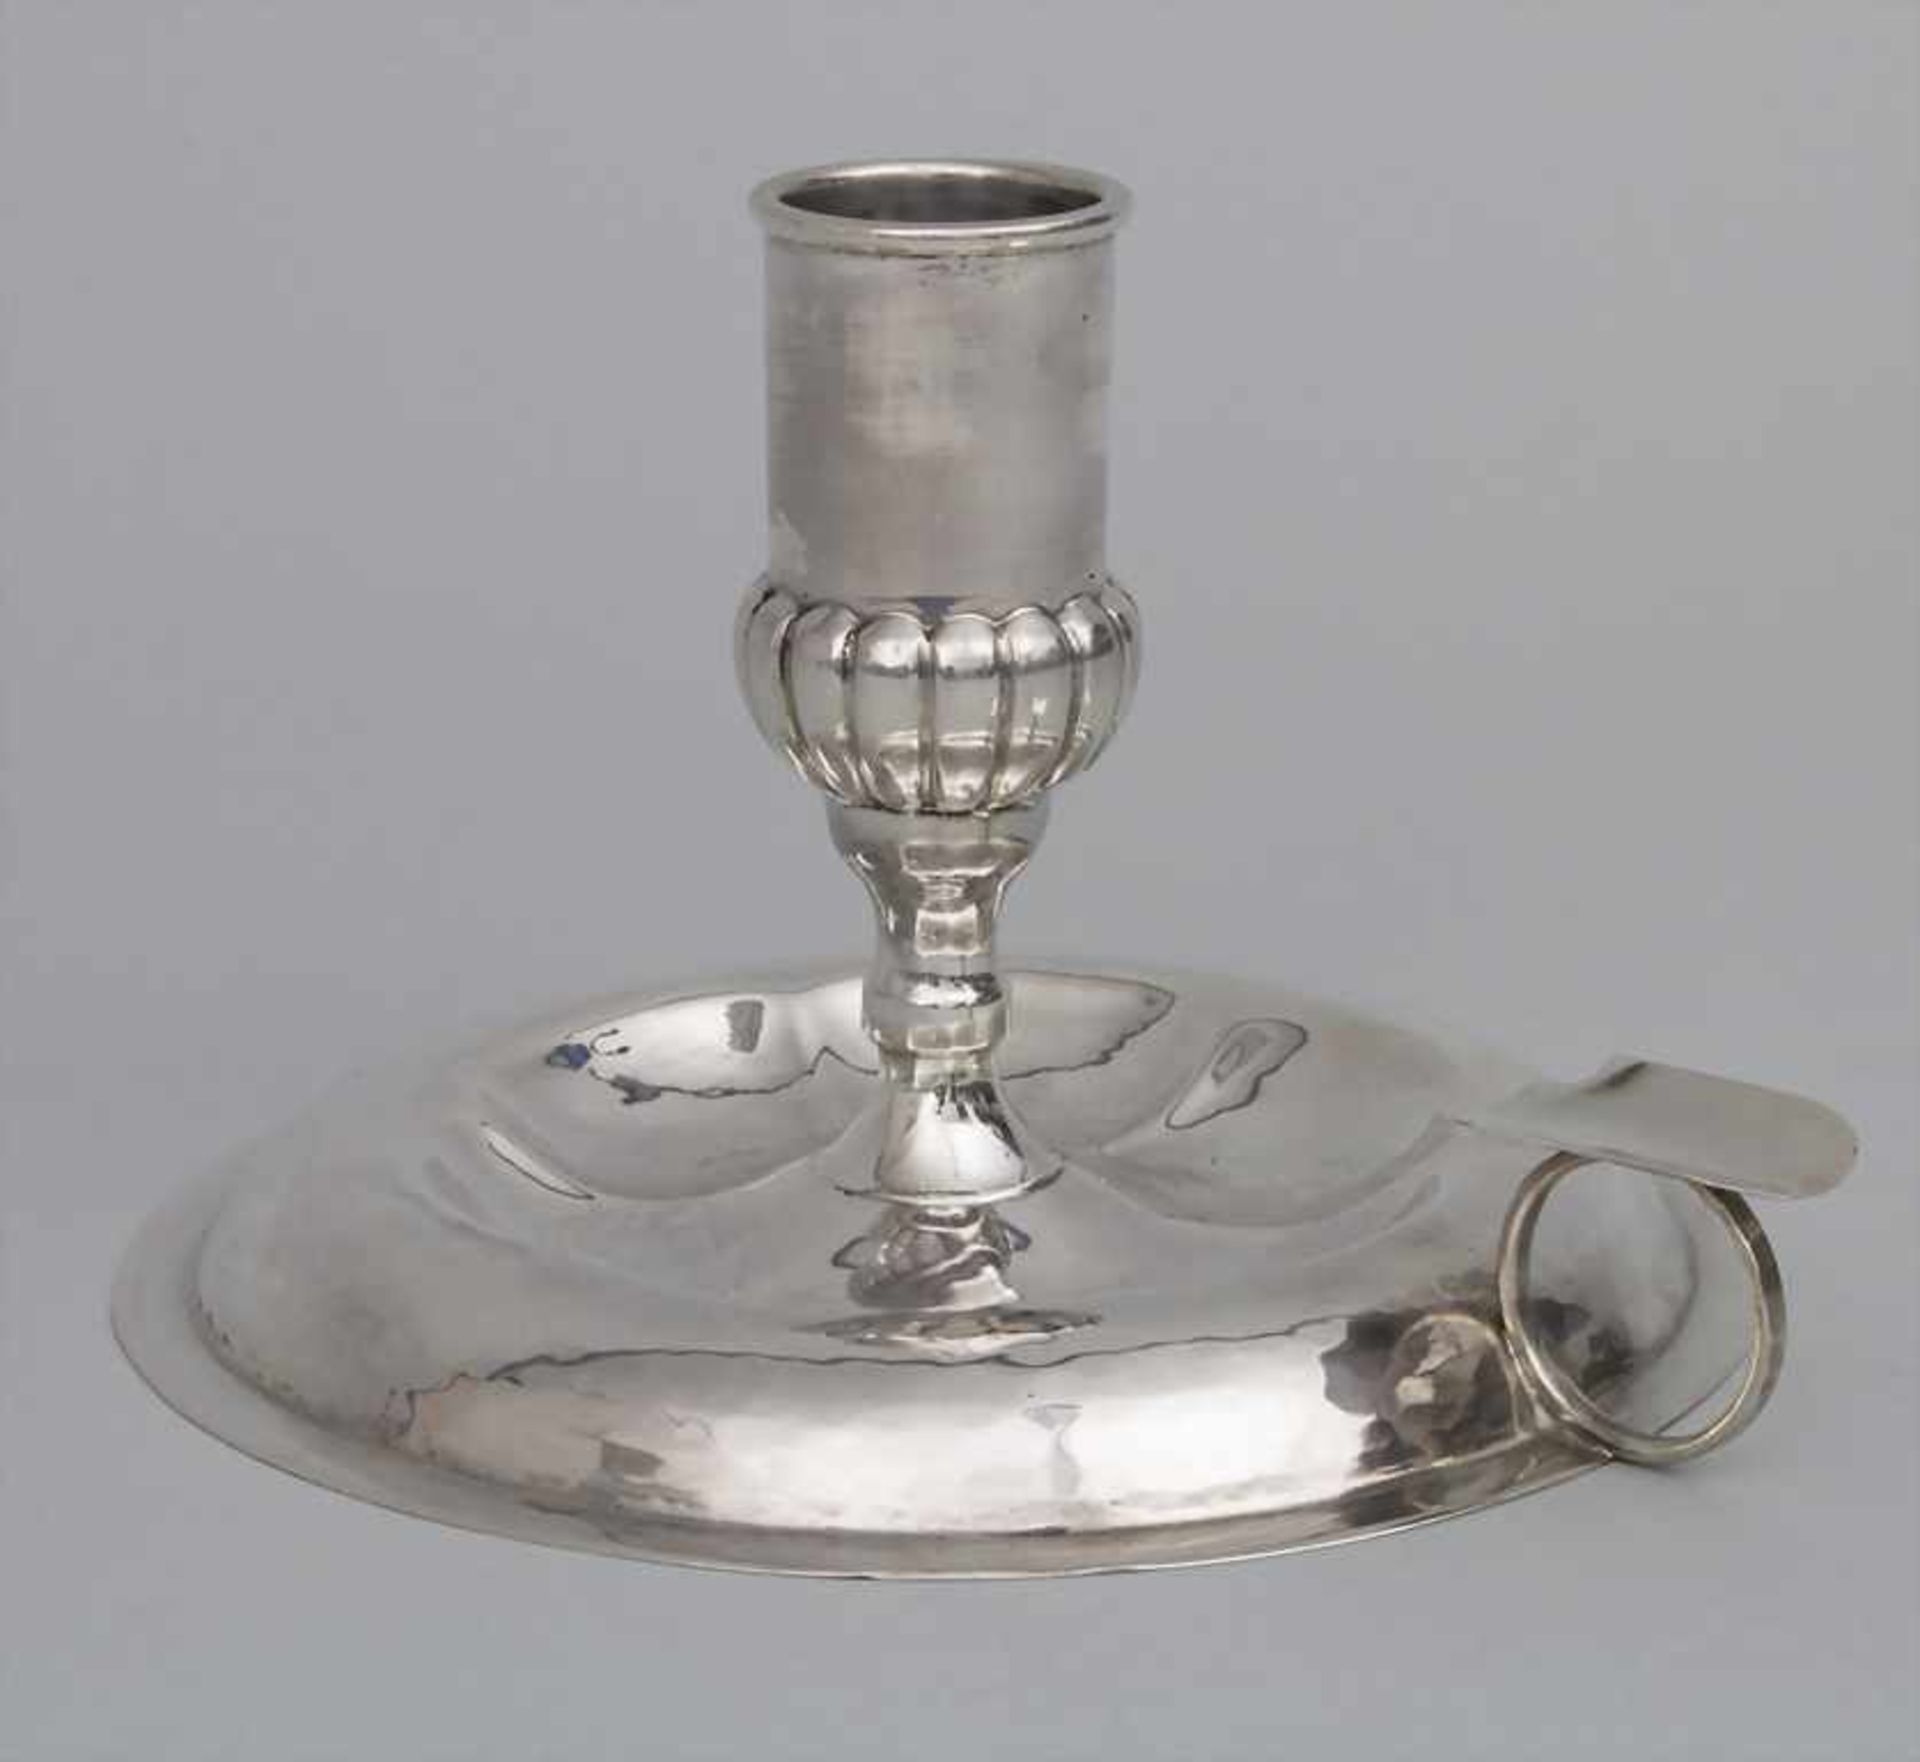 Handleuchter / A silver candleholder with handle, 18. Jh.